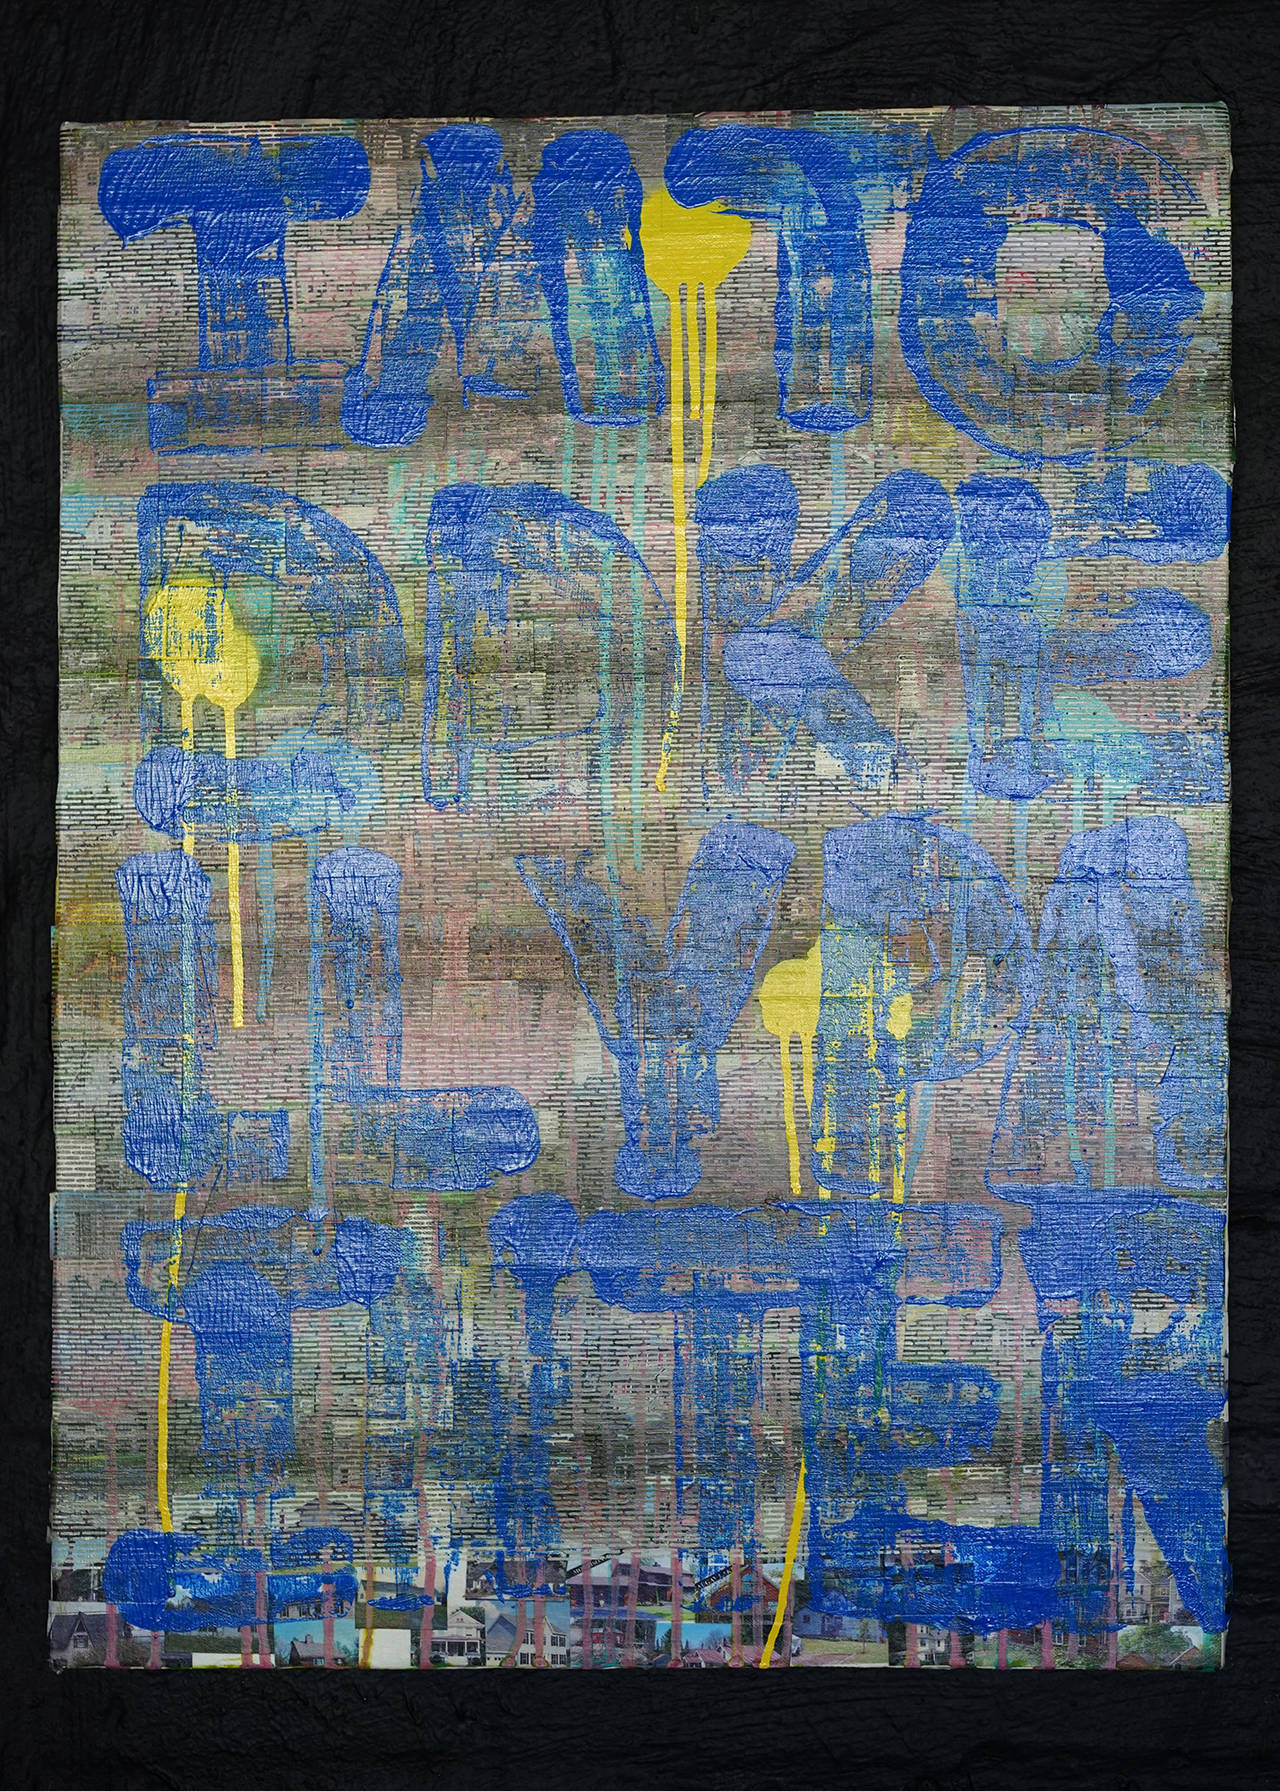 From left to right:

Untitled (Signature Painting), 2009.
Oil, spray, paint, collage on canvas.
Dimensions: 24